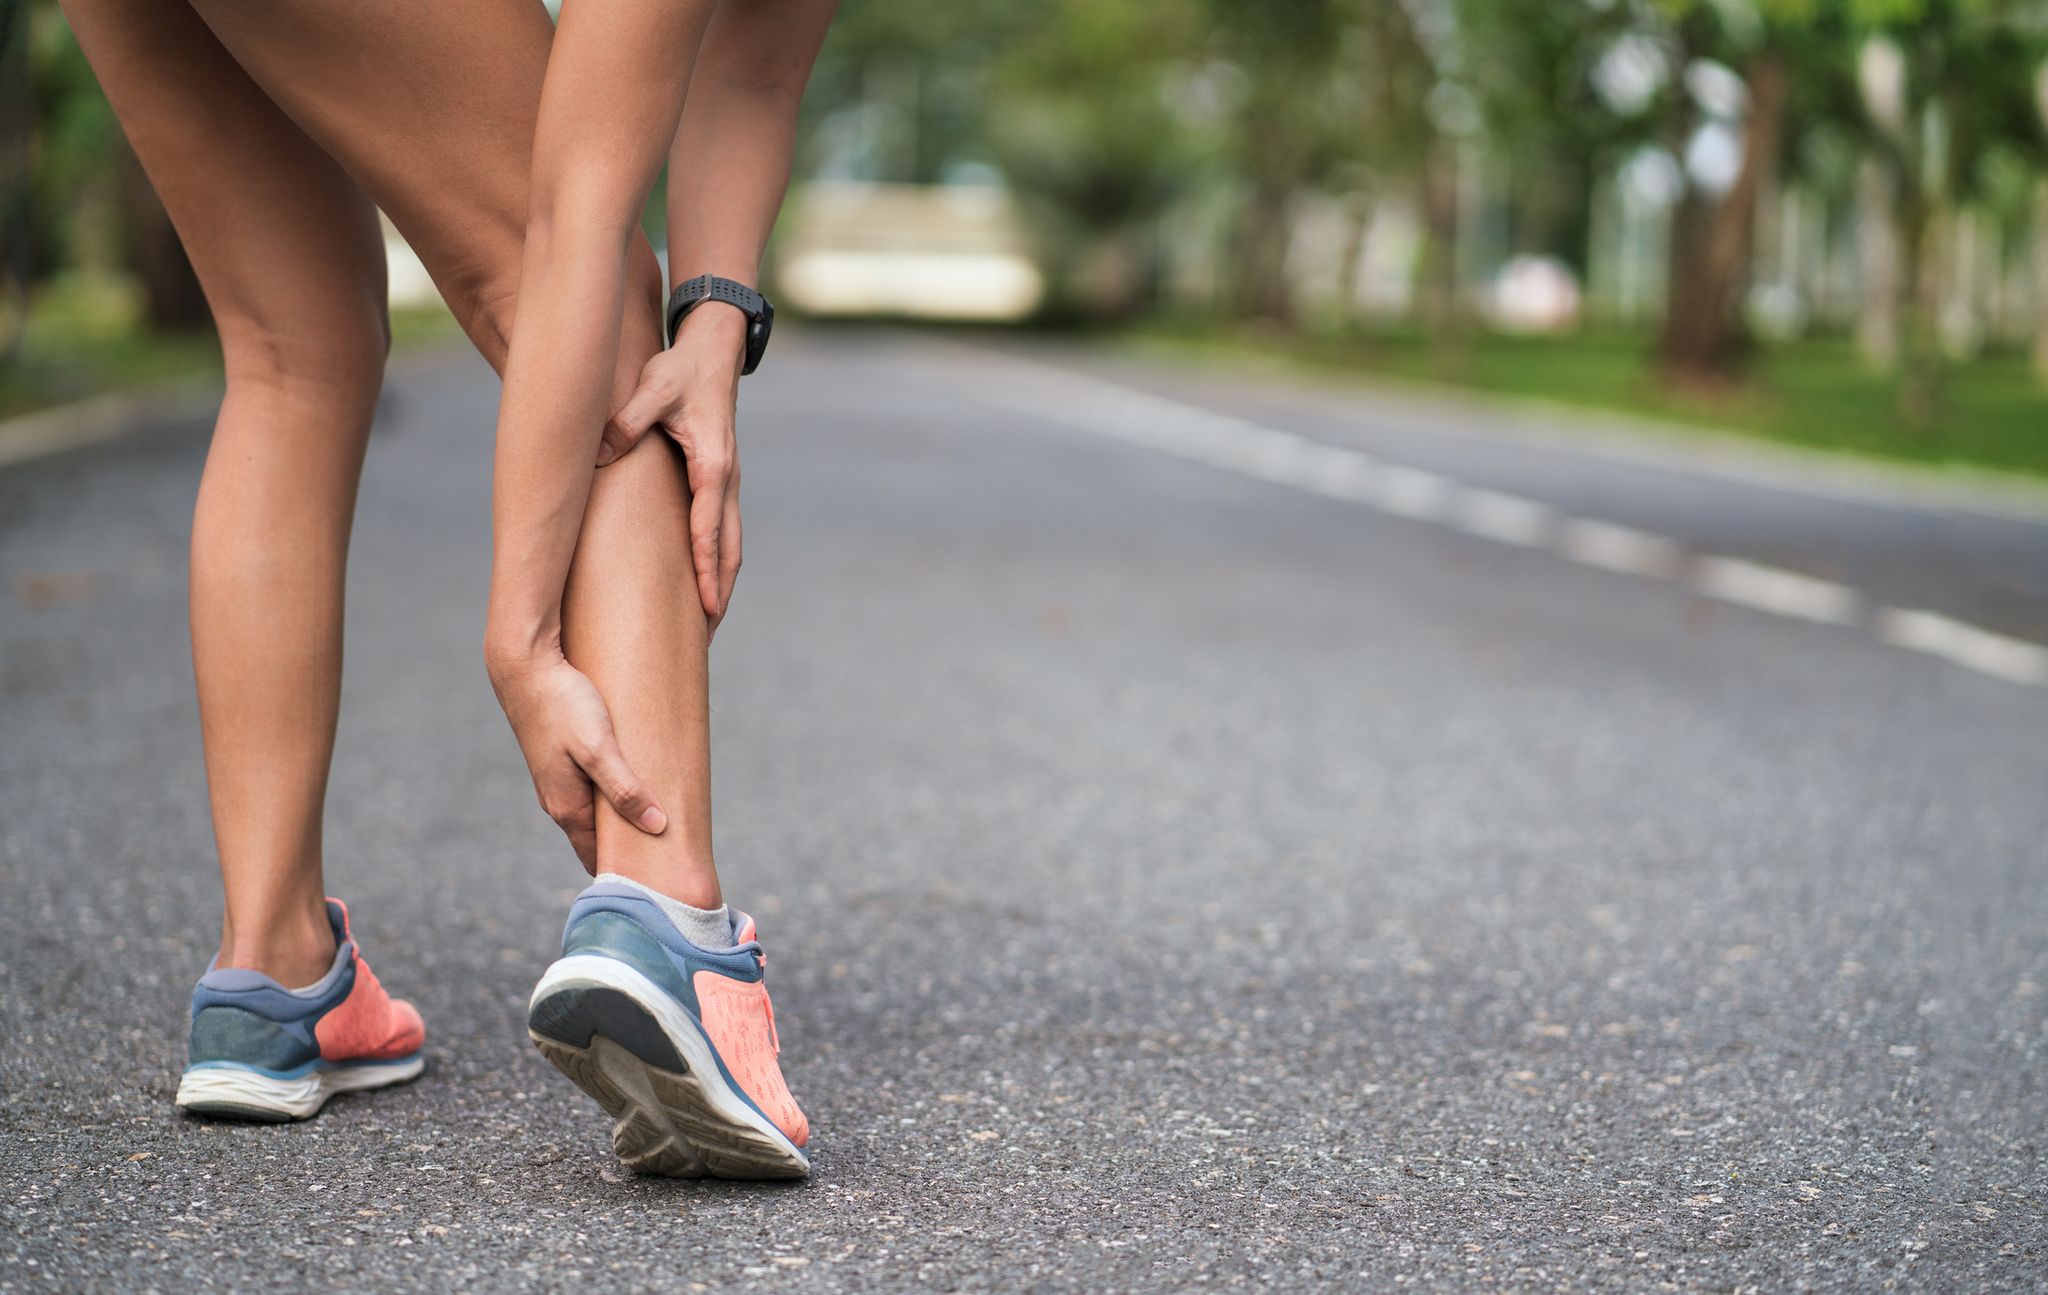 Calf muscle growth depends on foot positioning